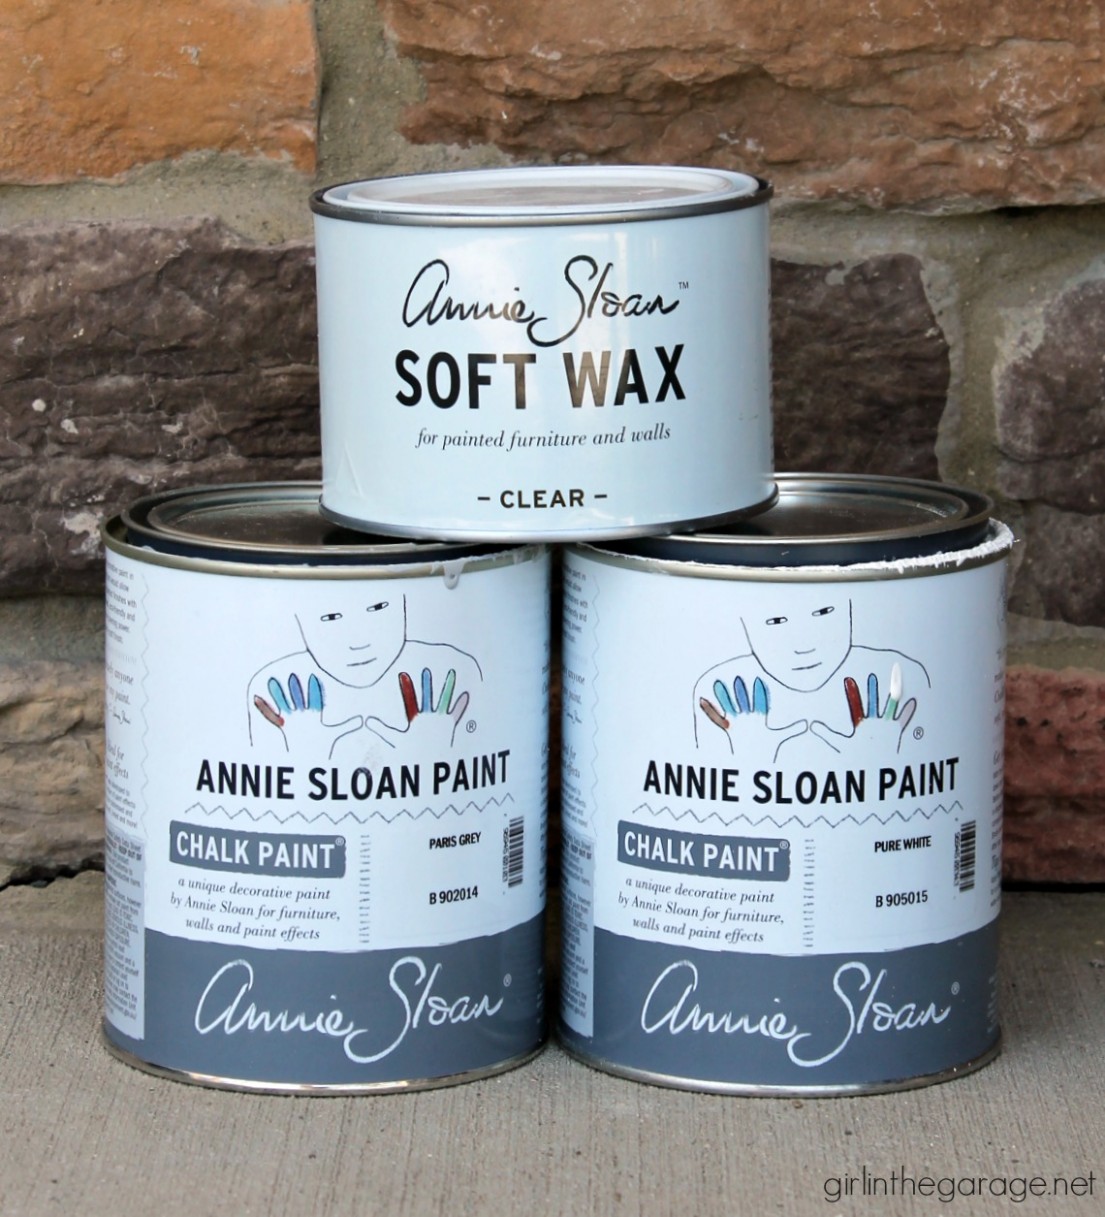 Img 6 Annie Sloan Chalk Paint Wax Girl In The Garage® Annie Sloan Chalk Paint Wax